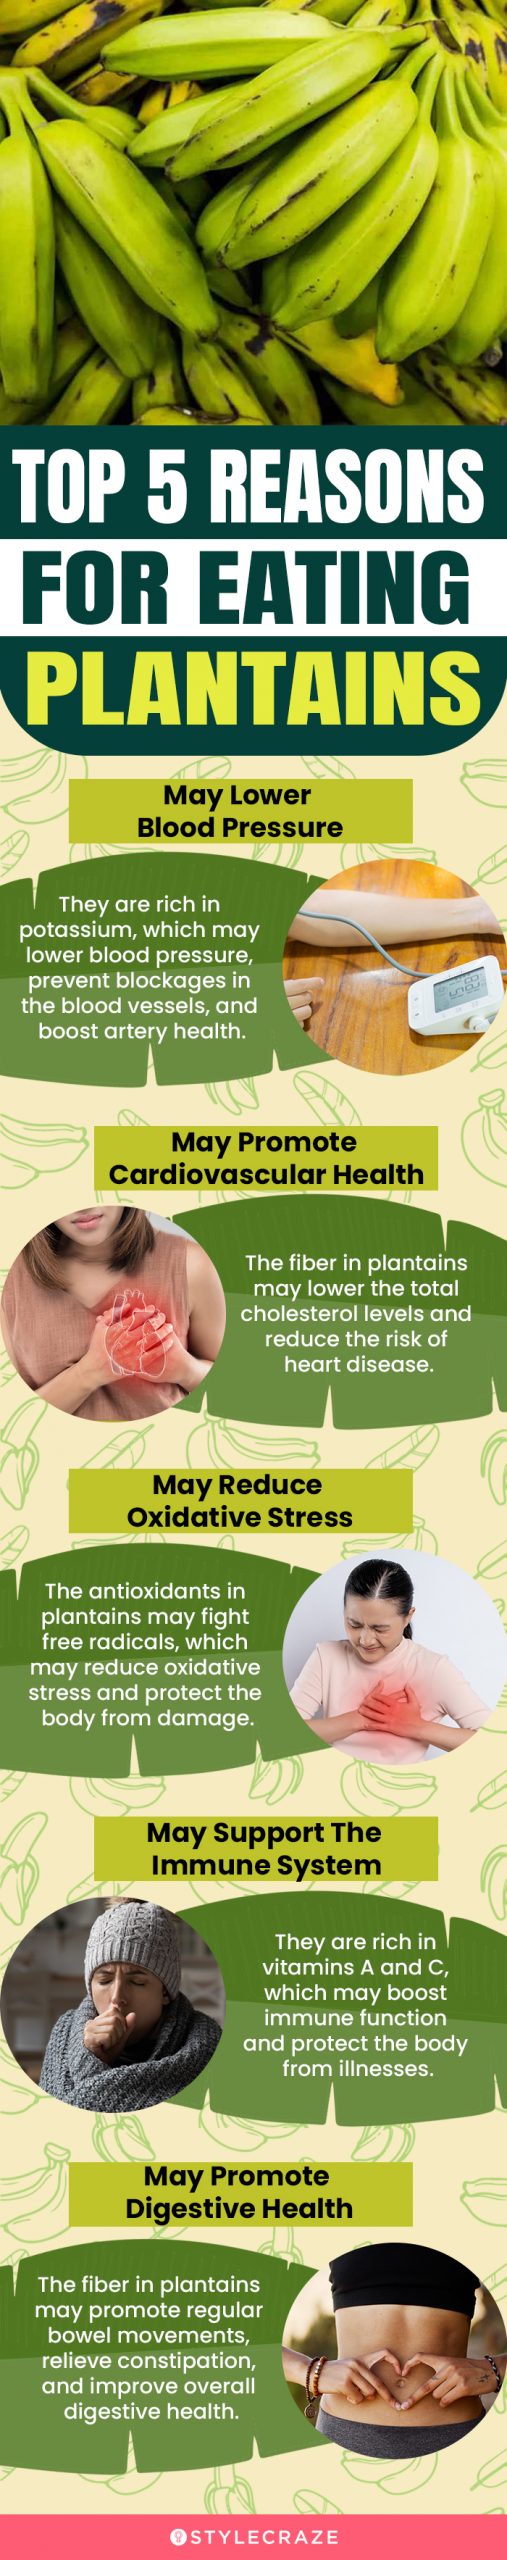  top 5 reasons for eating plantains (infographic)